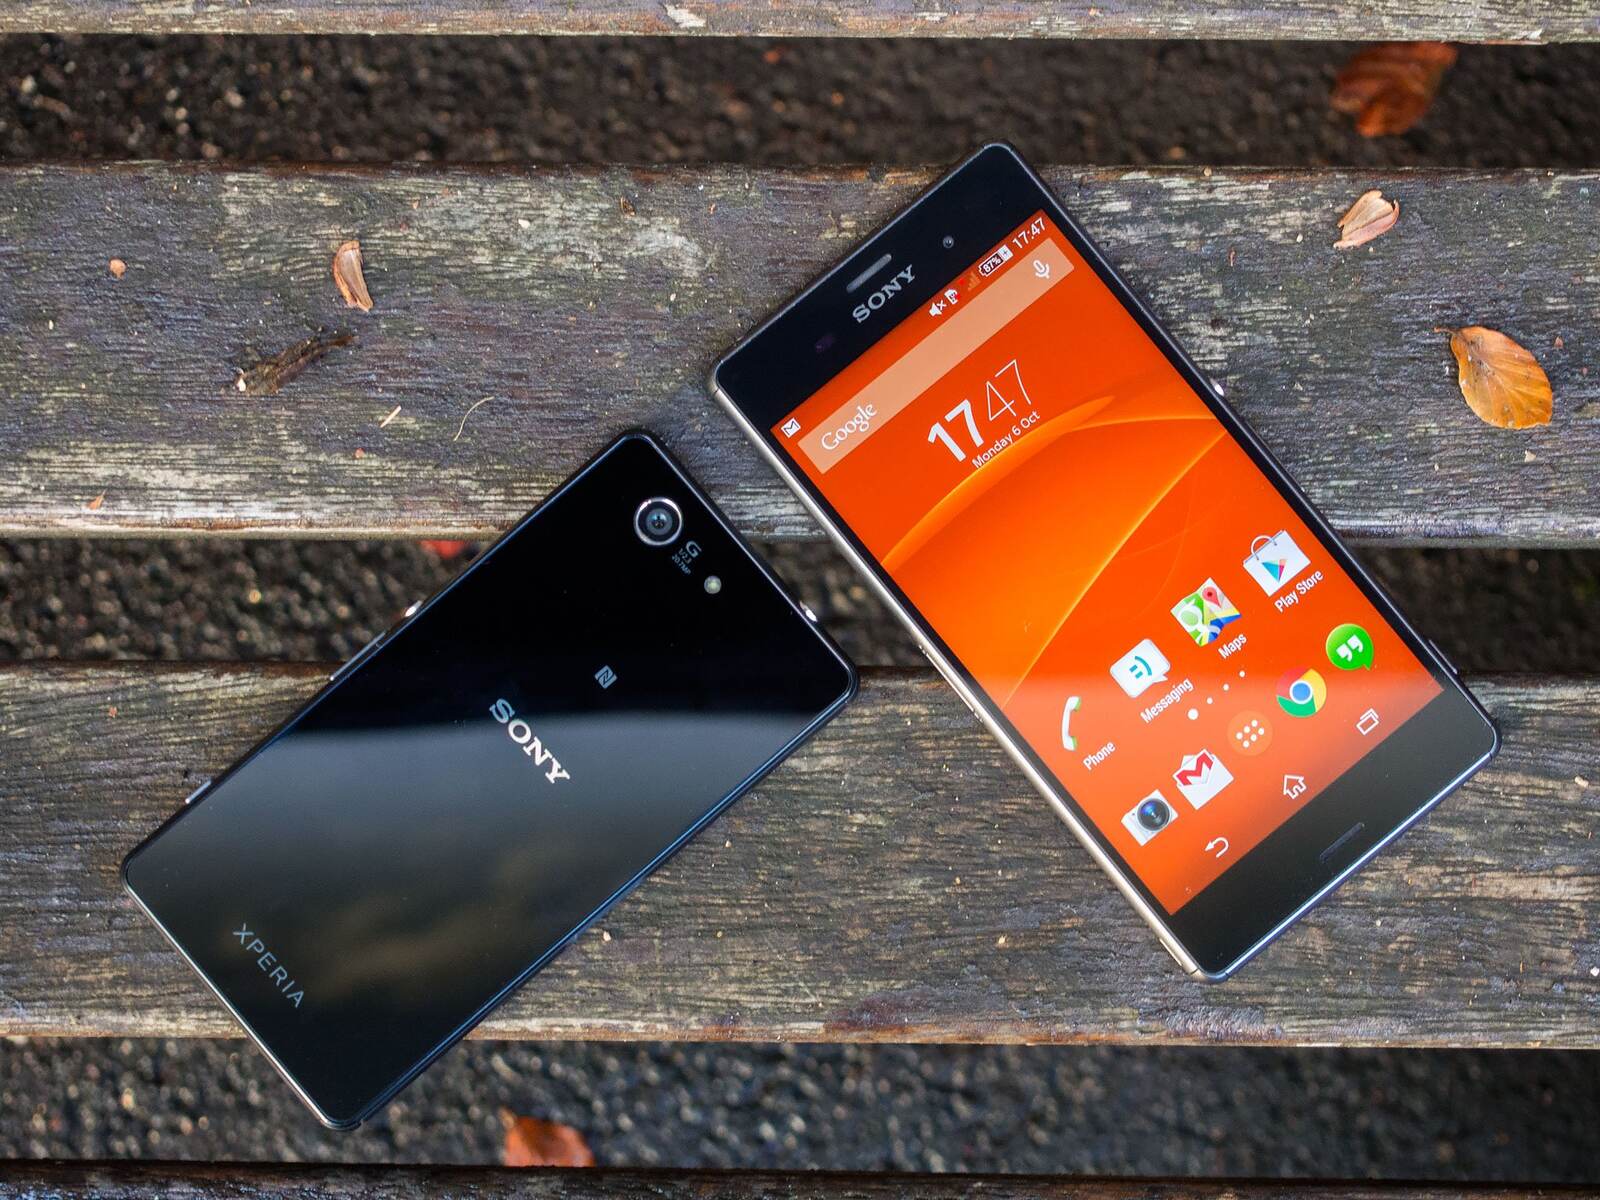 Blocking Unwanted Calls On Xperia Z3